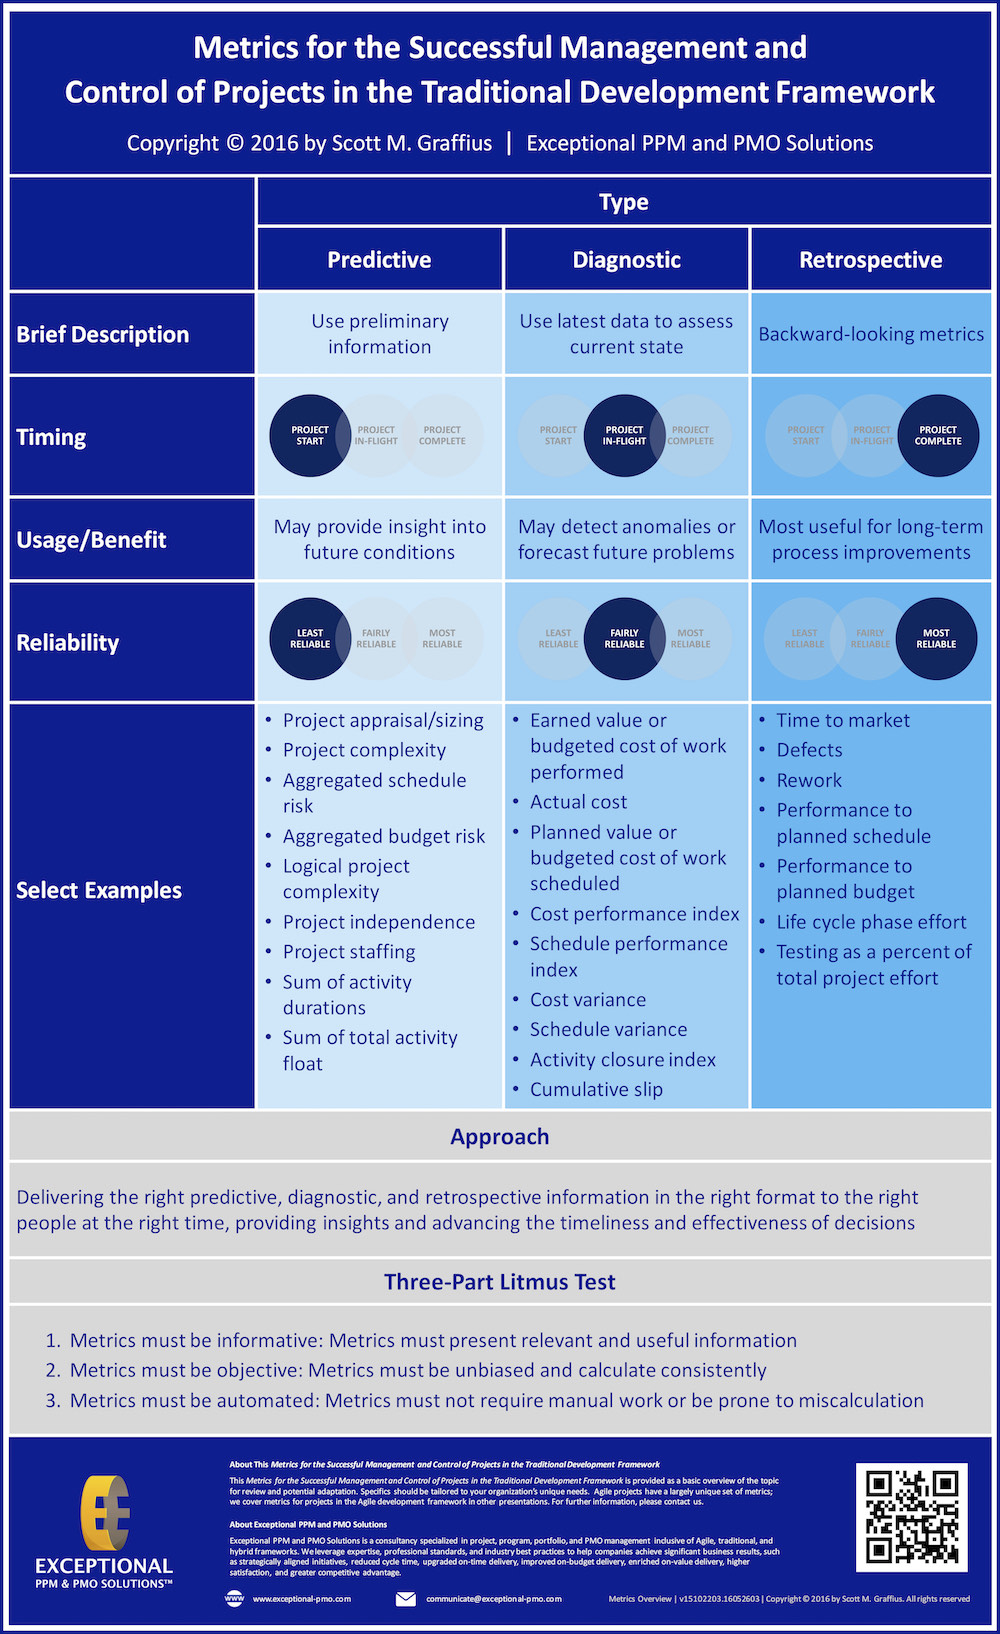 Scott-M-Graffius-Exceptional-PPM-and-PMO-Solutions-Infographic-Diverse-Metrics-LR-SQ